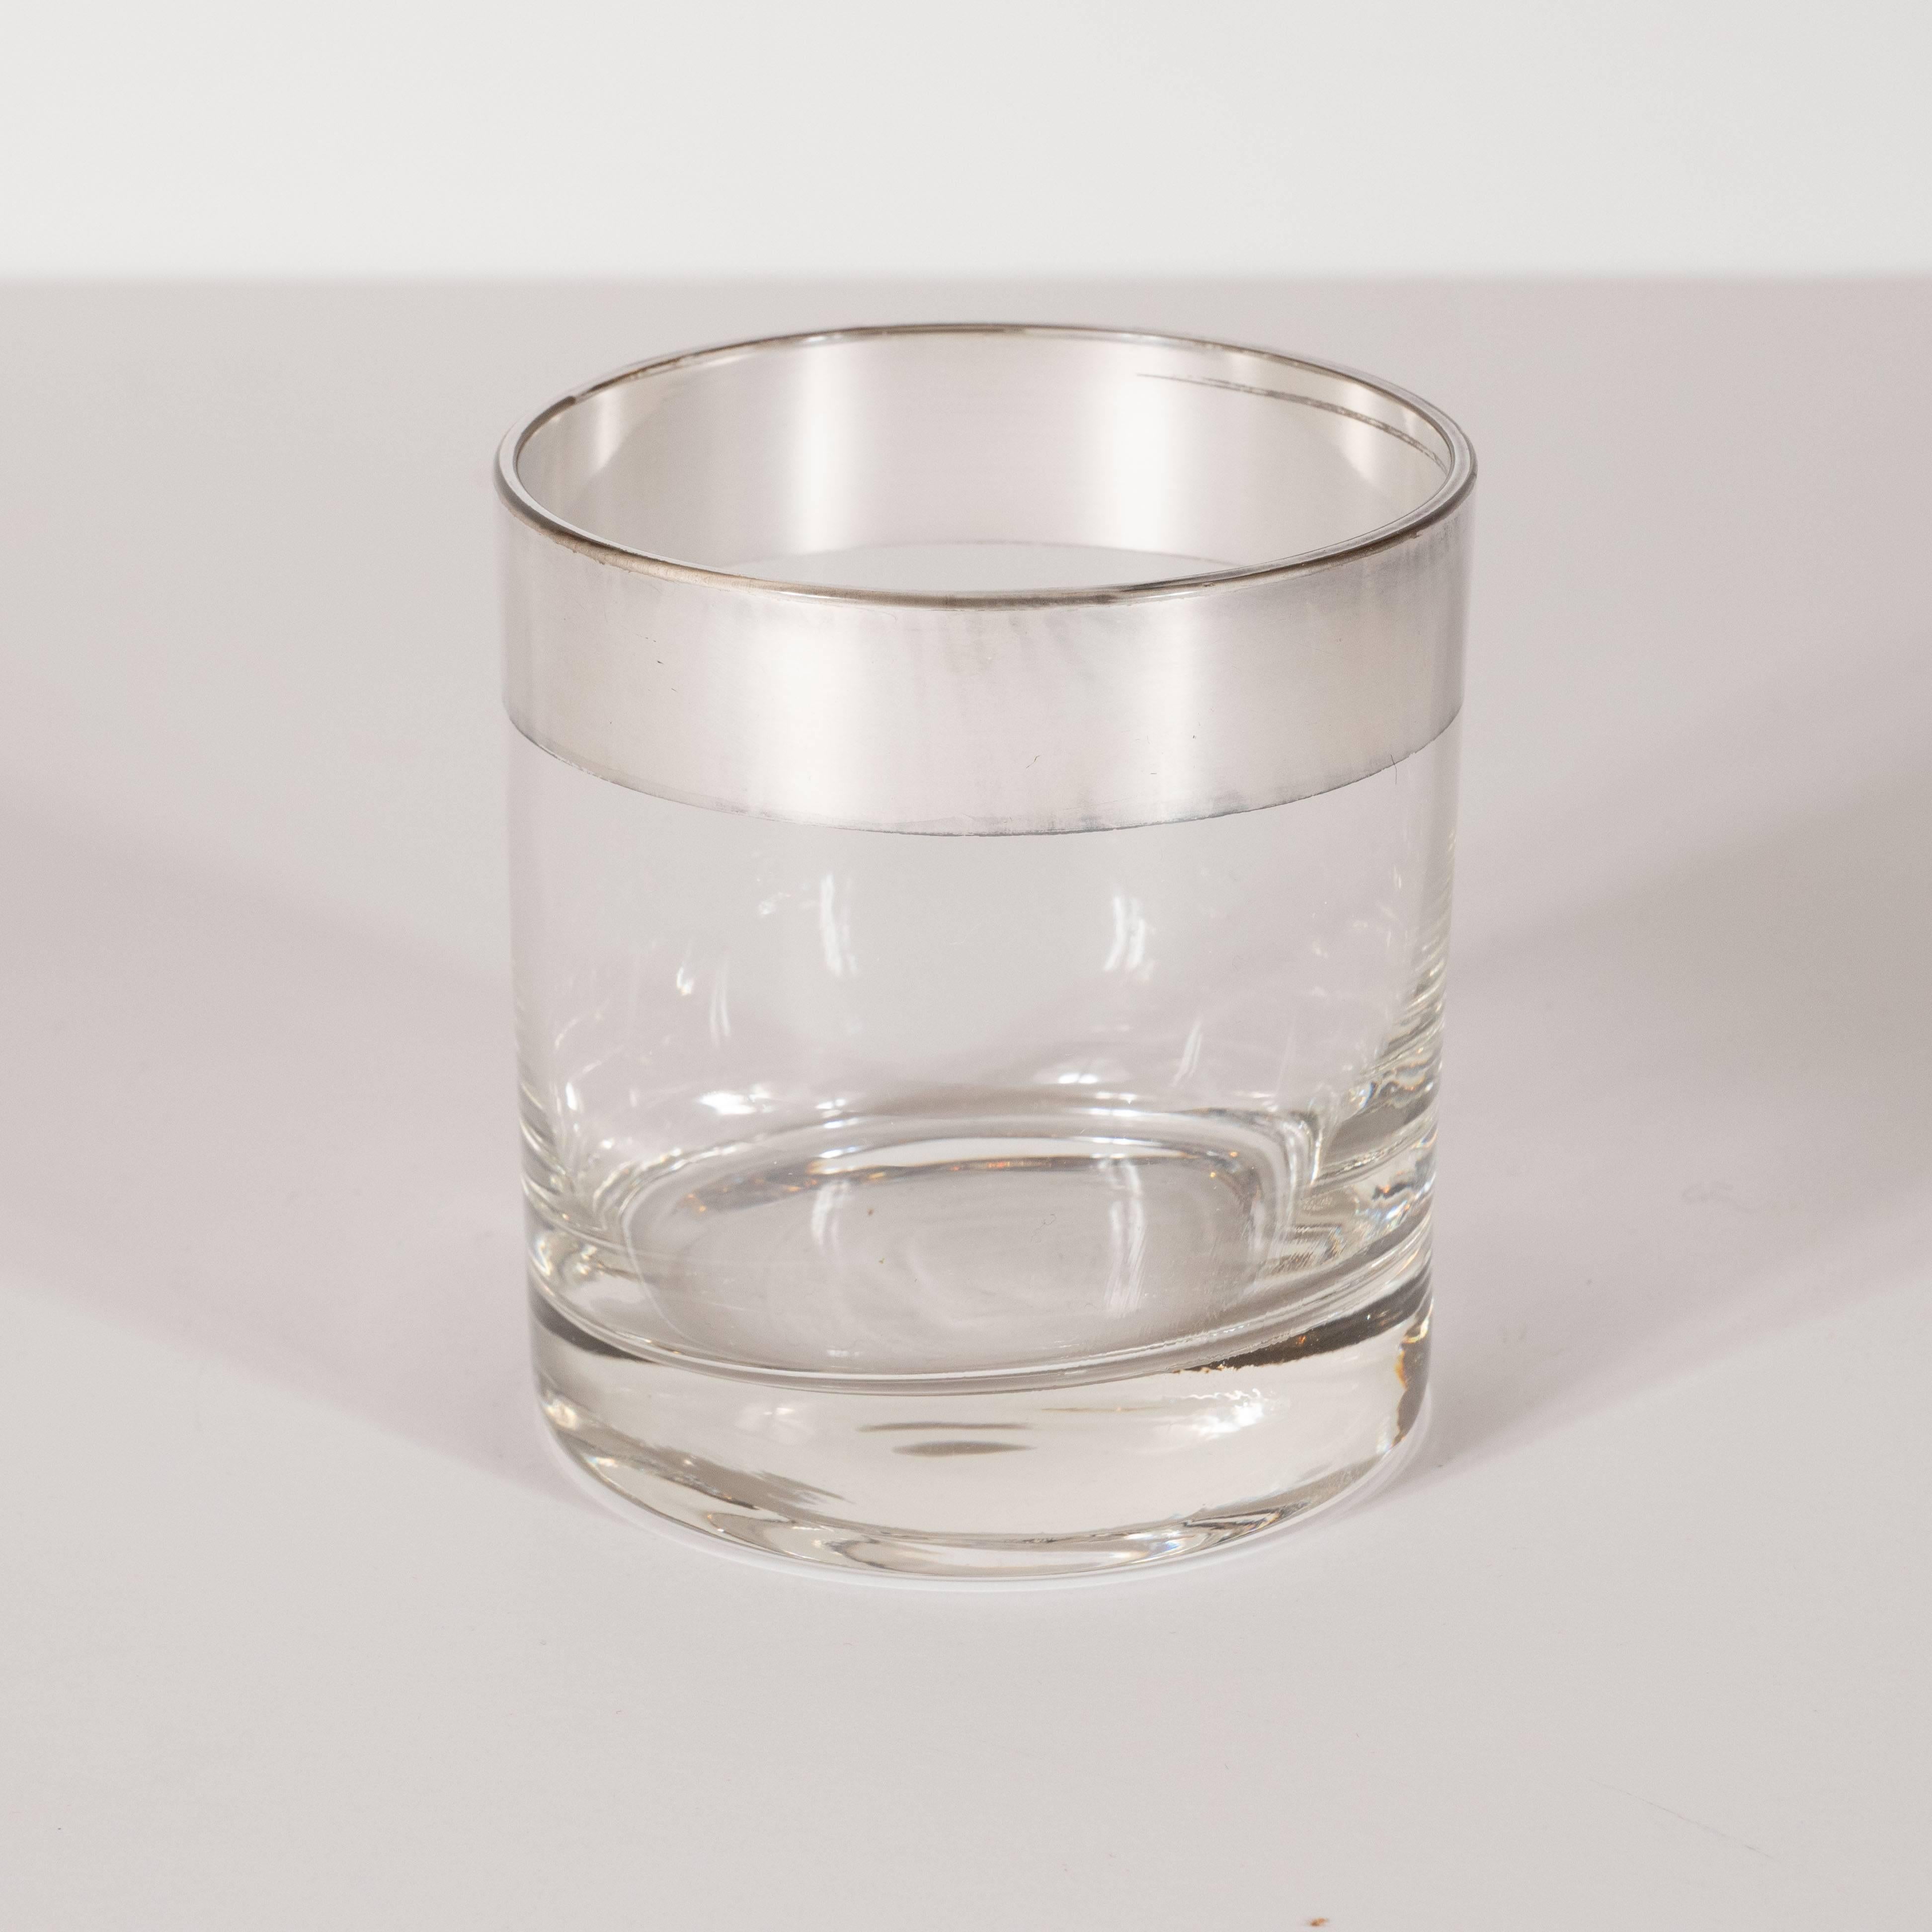 This refined set of four lowball glasses were designed in California by the esteemed Mid-Century Modern designer Dorothy Thorpe, circa 1950. Composed of simple cylindrical forms, they offer band detailing in sterling silver overlay at the top of